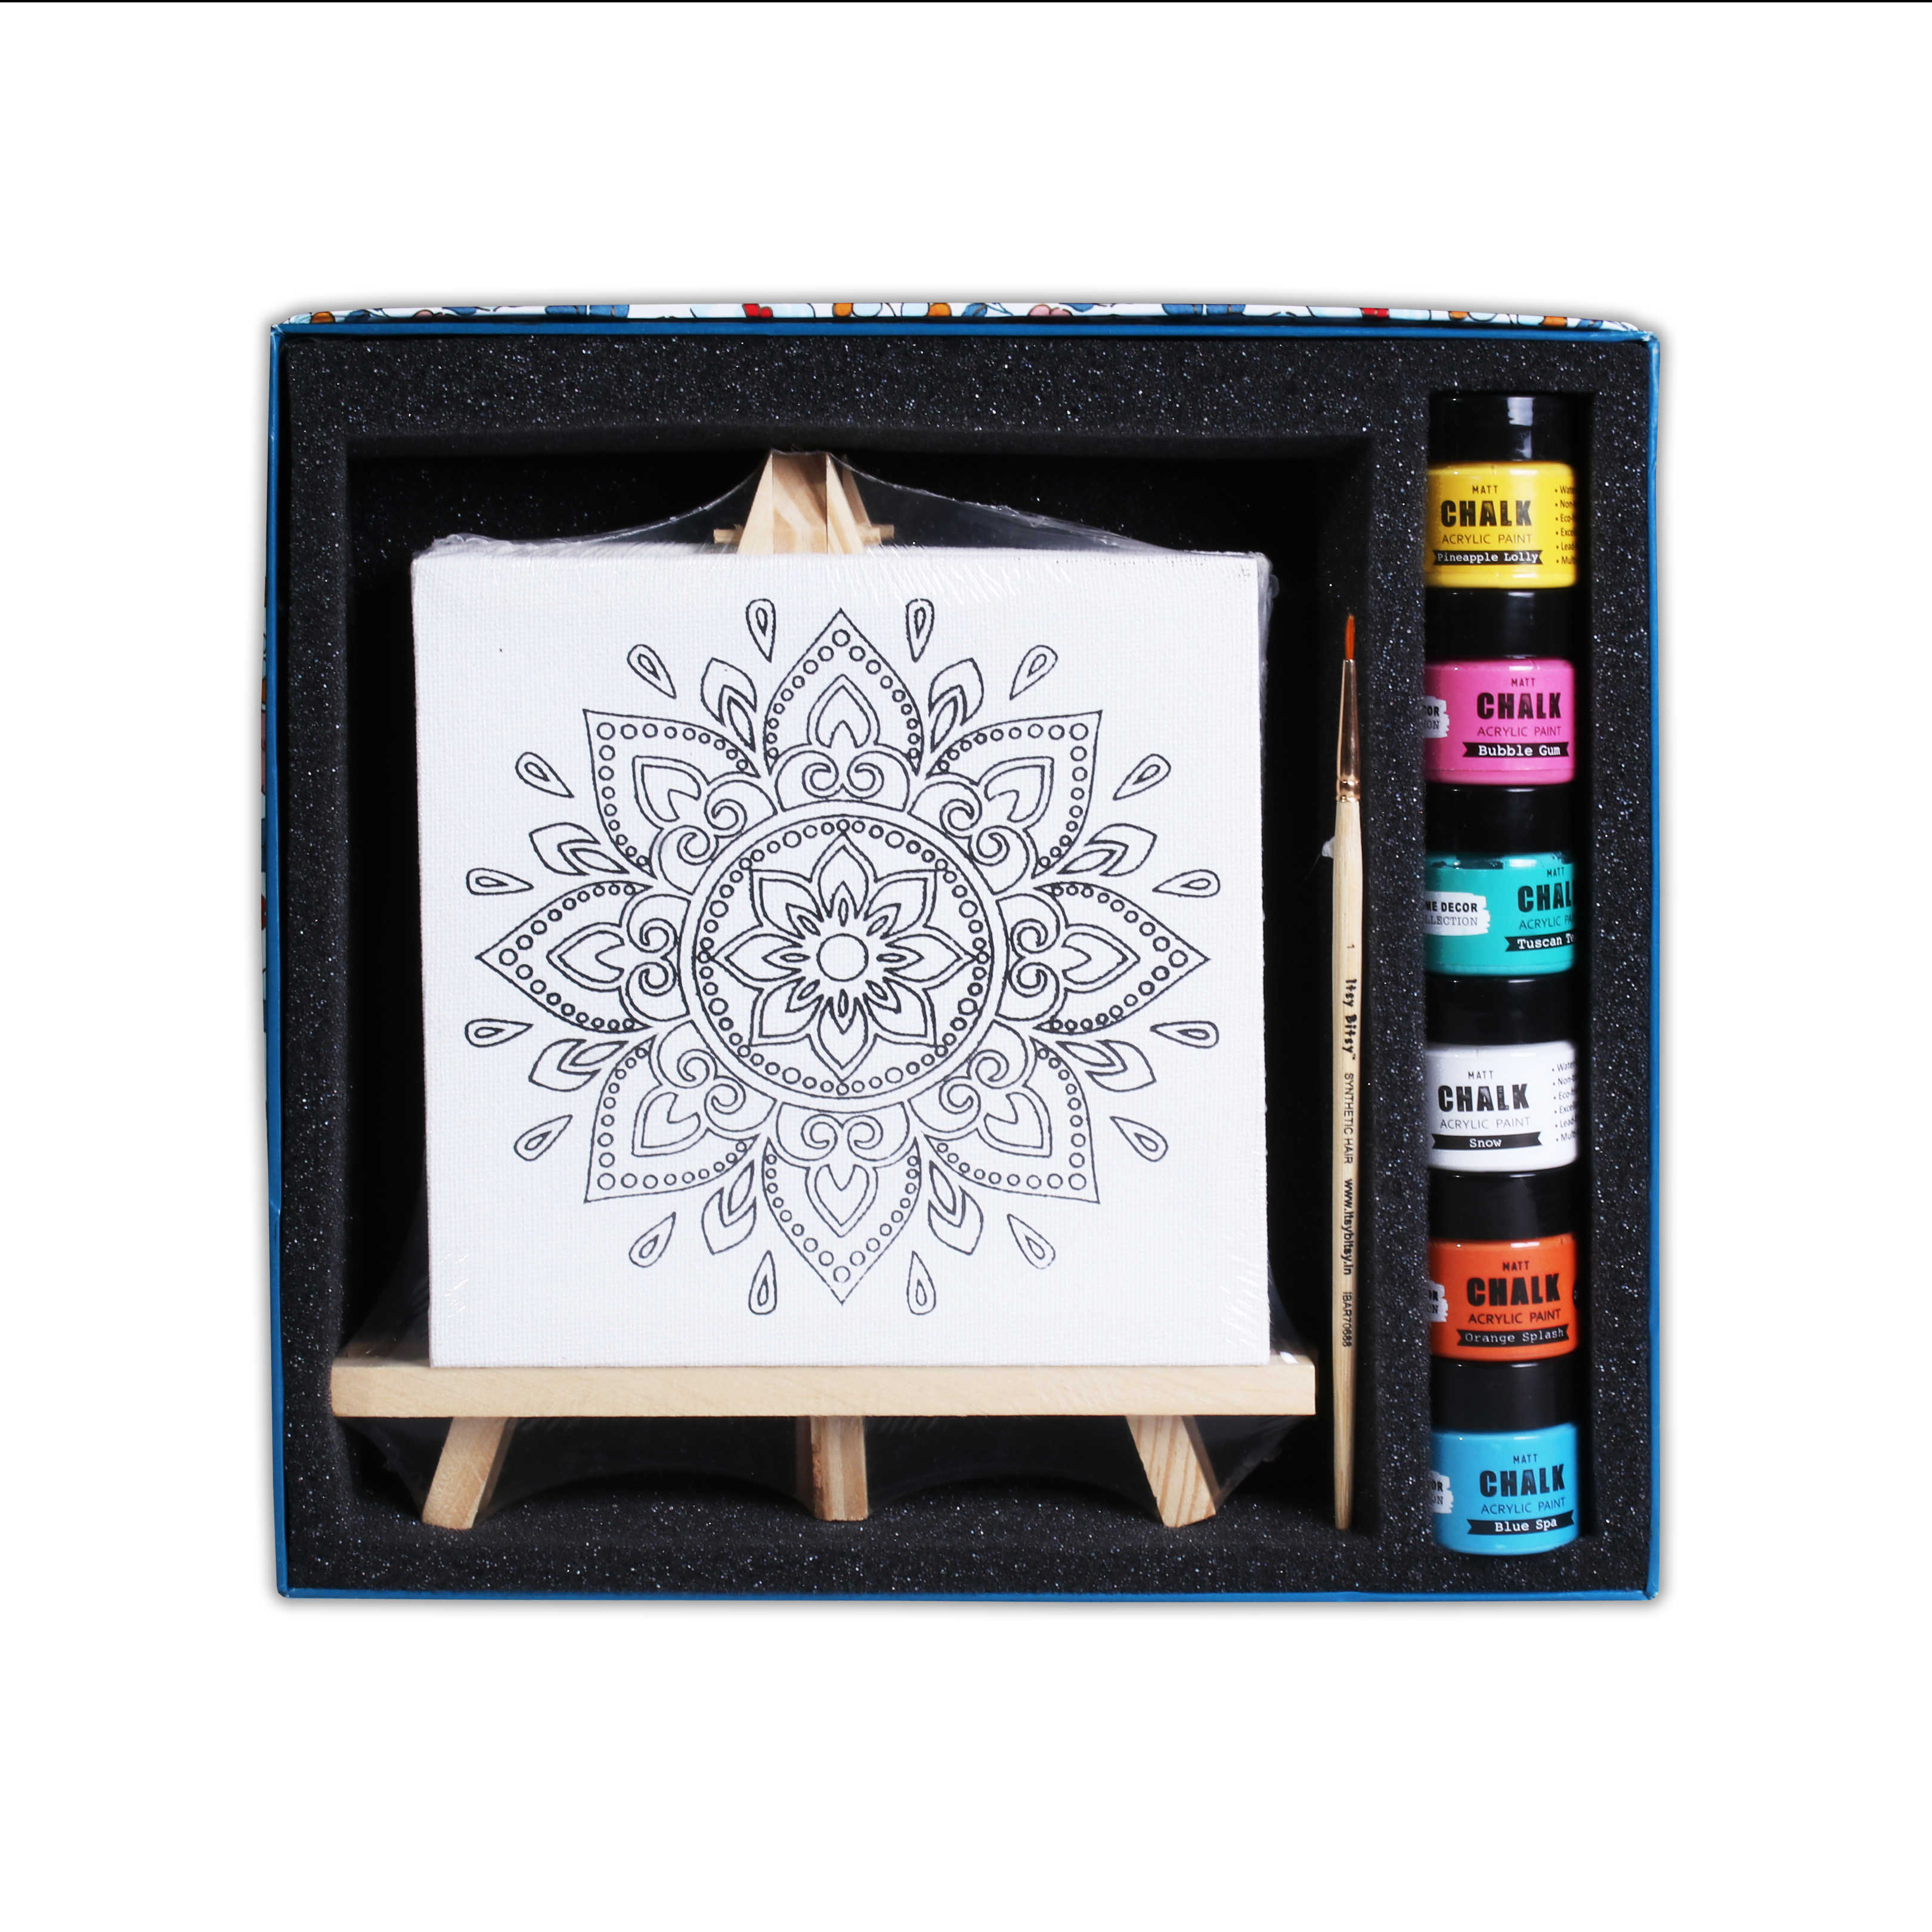 Mandala Blossom Art Kit  - Gift Of Creativity (1 Preprinted Canvas with Easel  1 Plain Canvas with Easel)